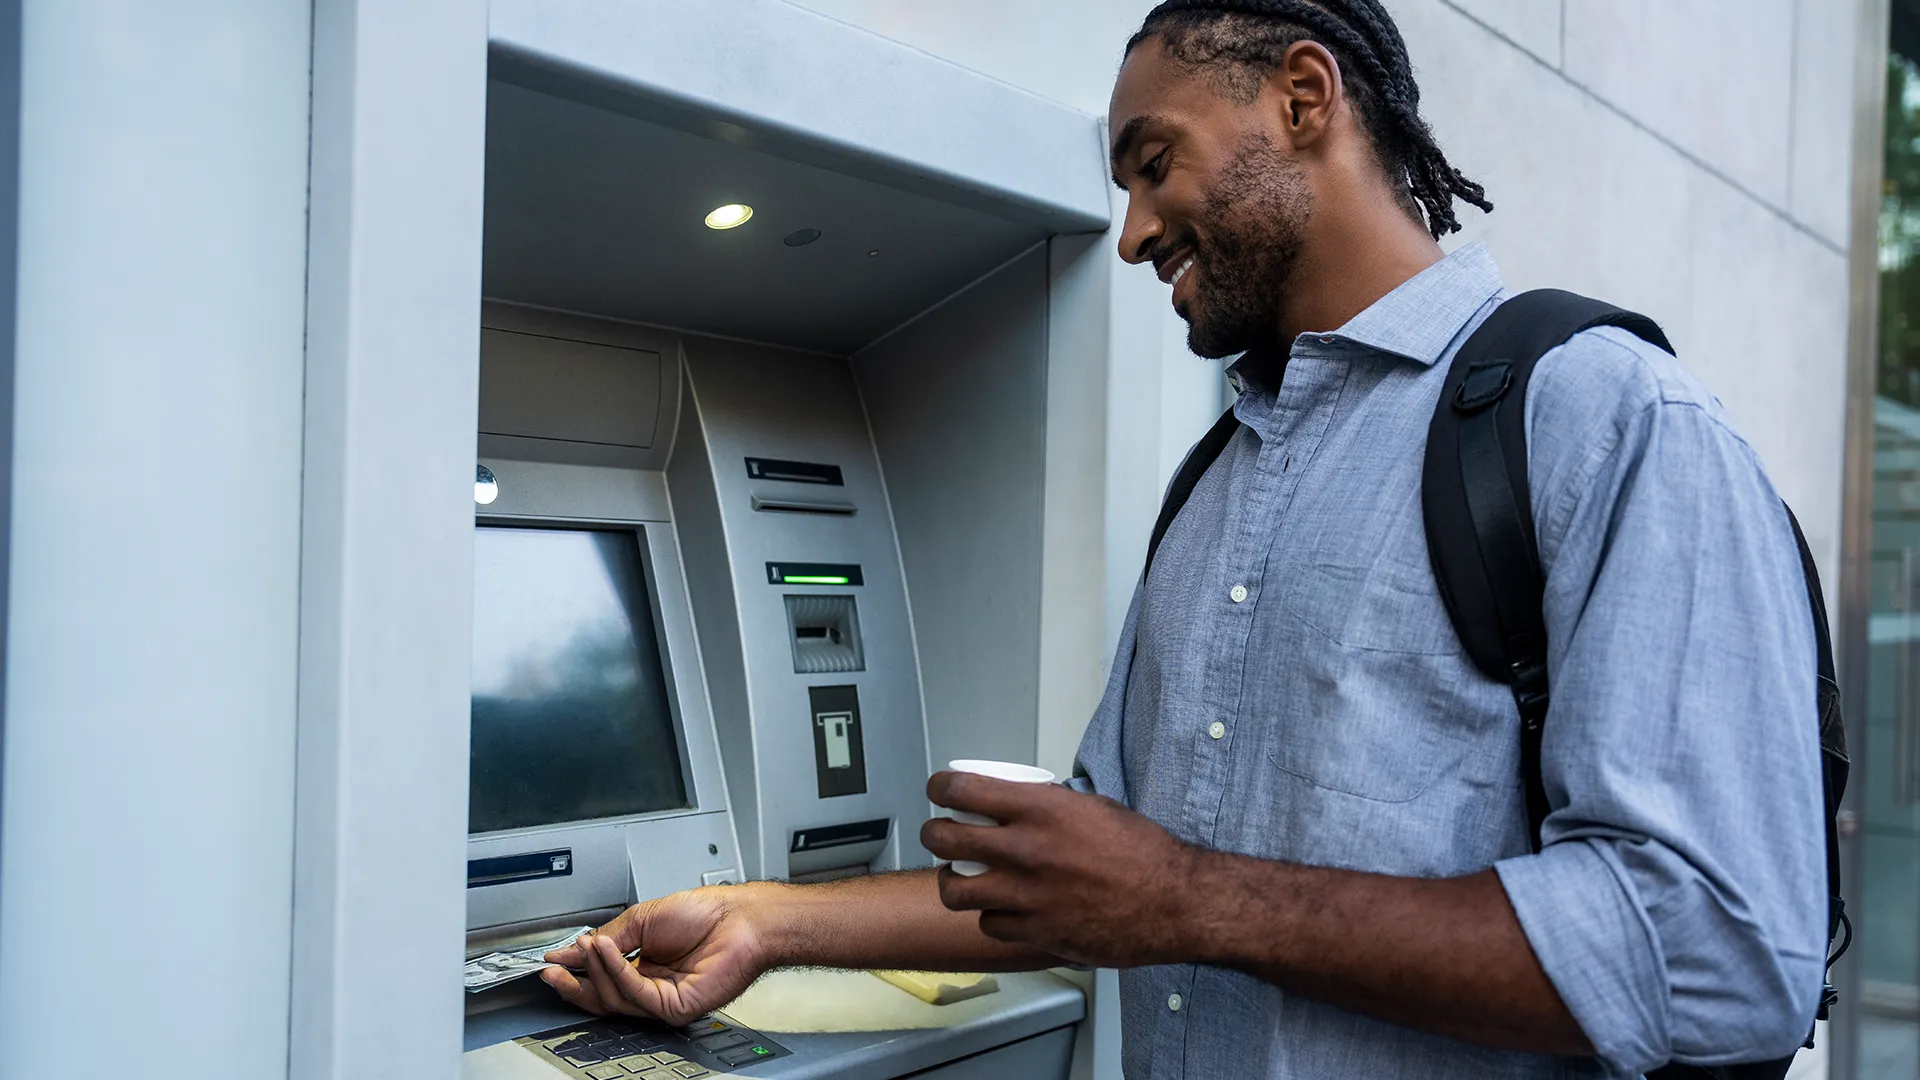 Pictured is a man wearing a blue, button-down shirt and backpack retrieving cash from an ATM. The man is smiling and holding a coffee, evoking the ease of the process.